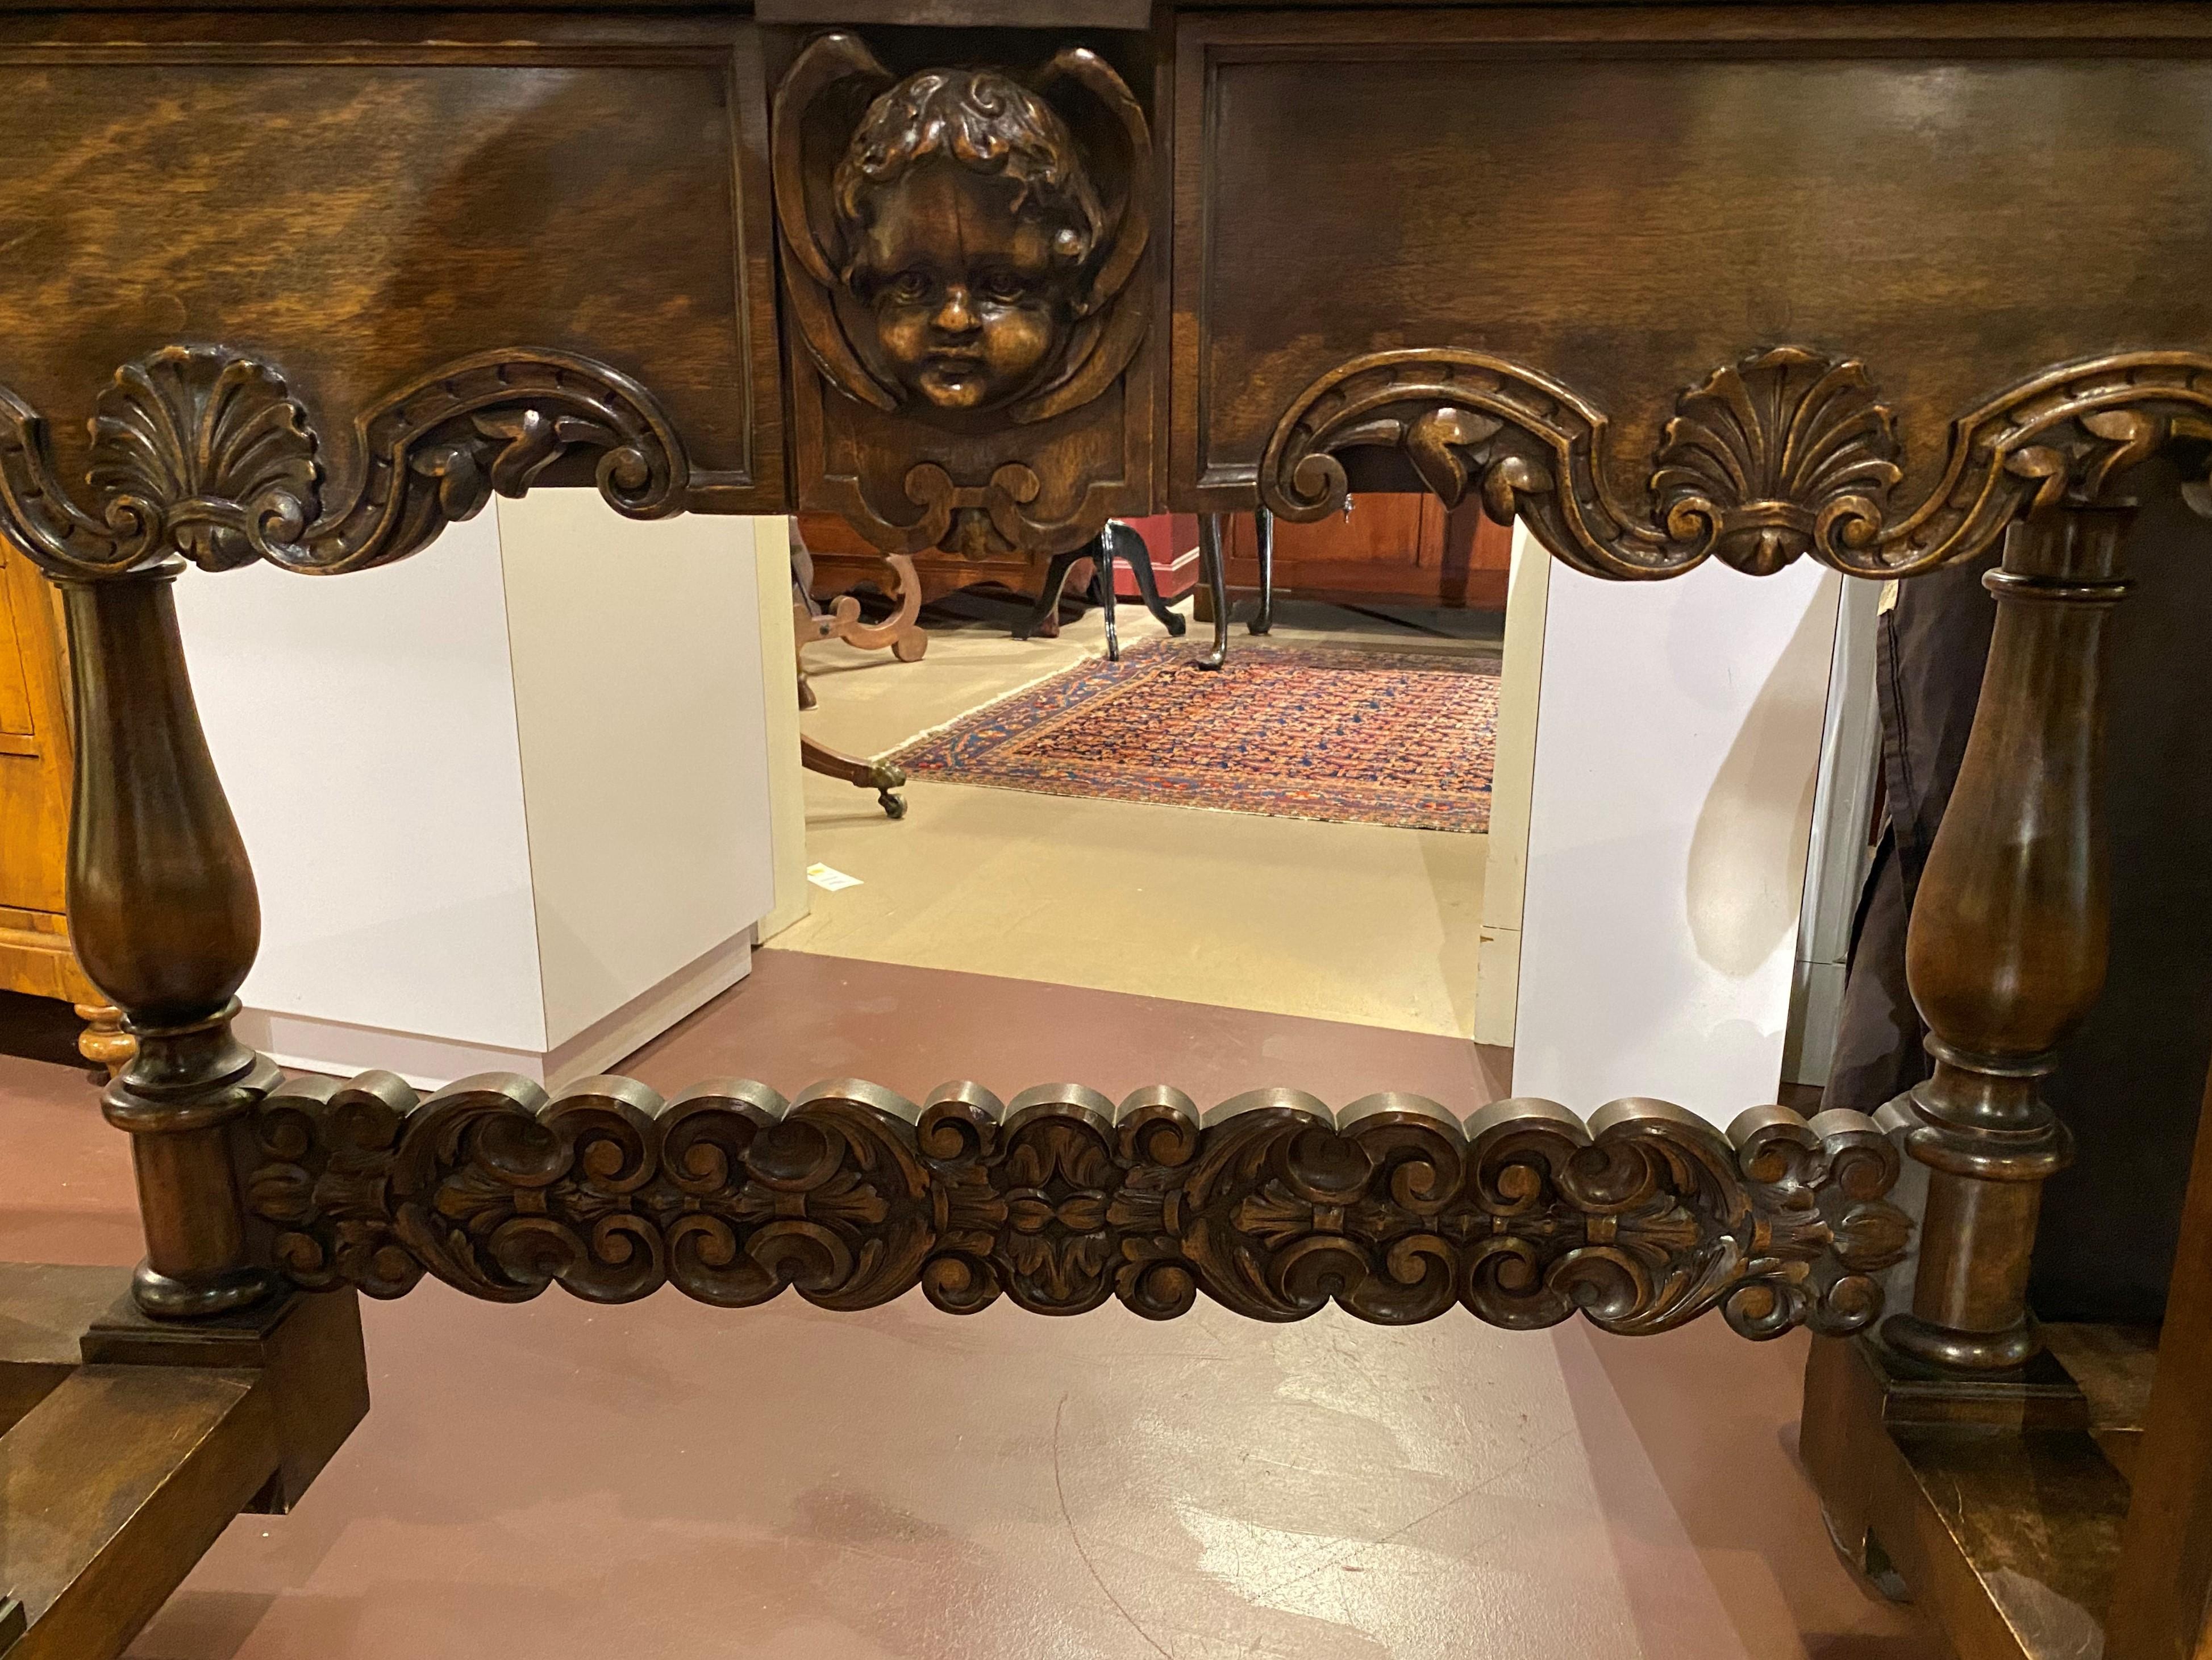 20th Century Mahogany Baroque Revival Marble Top Console Table with Lion & Acanthus Carving For Sale